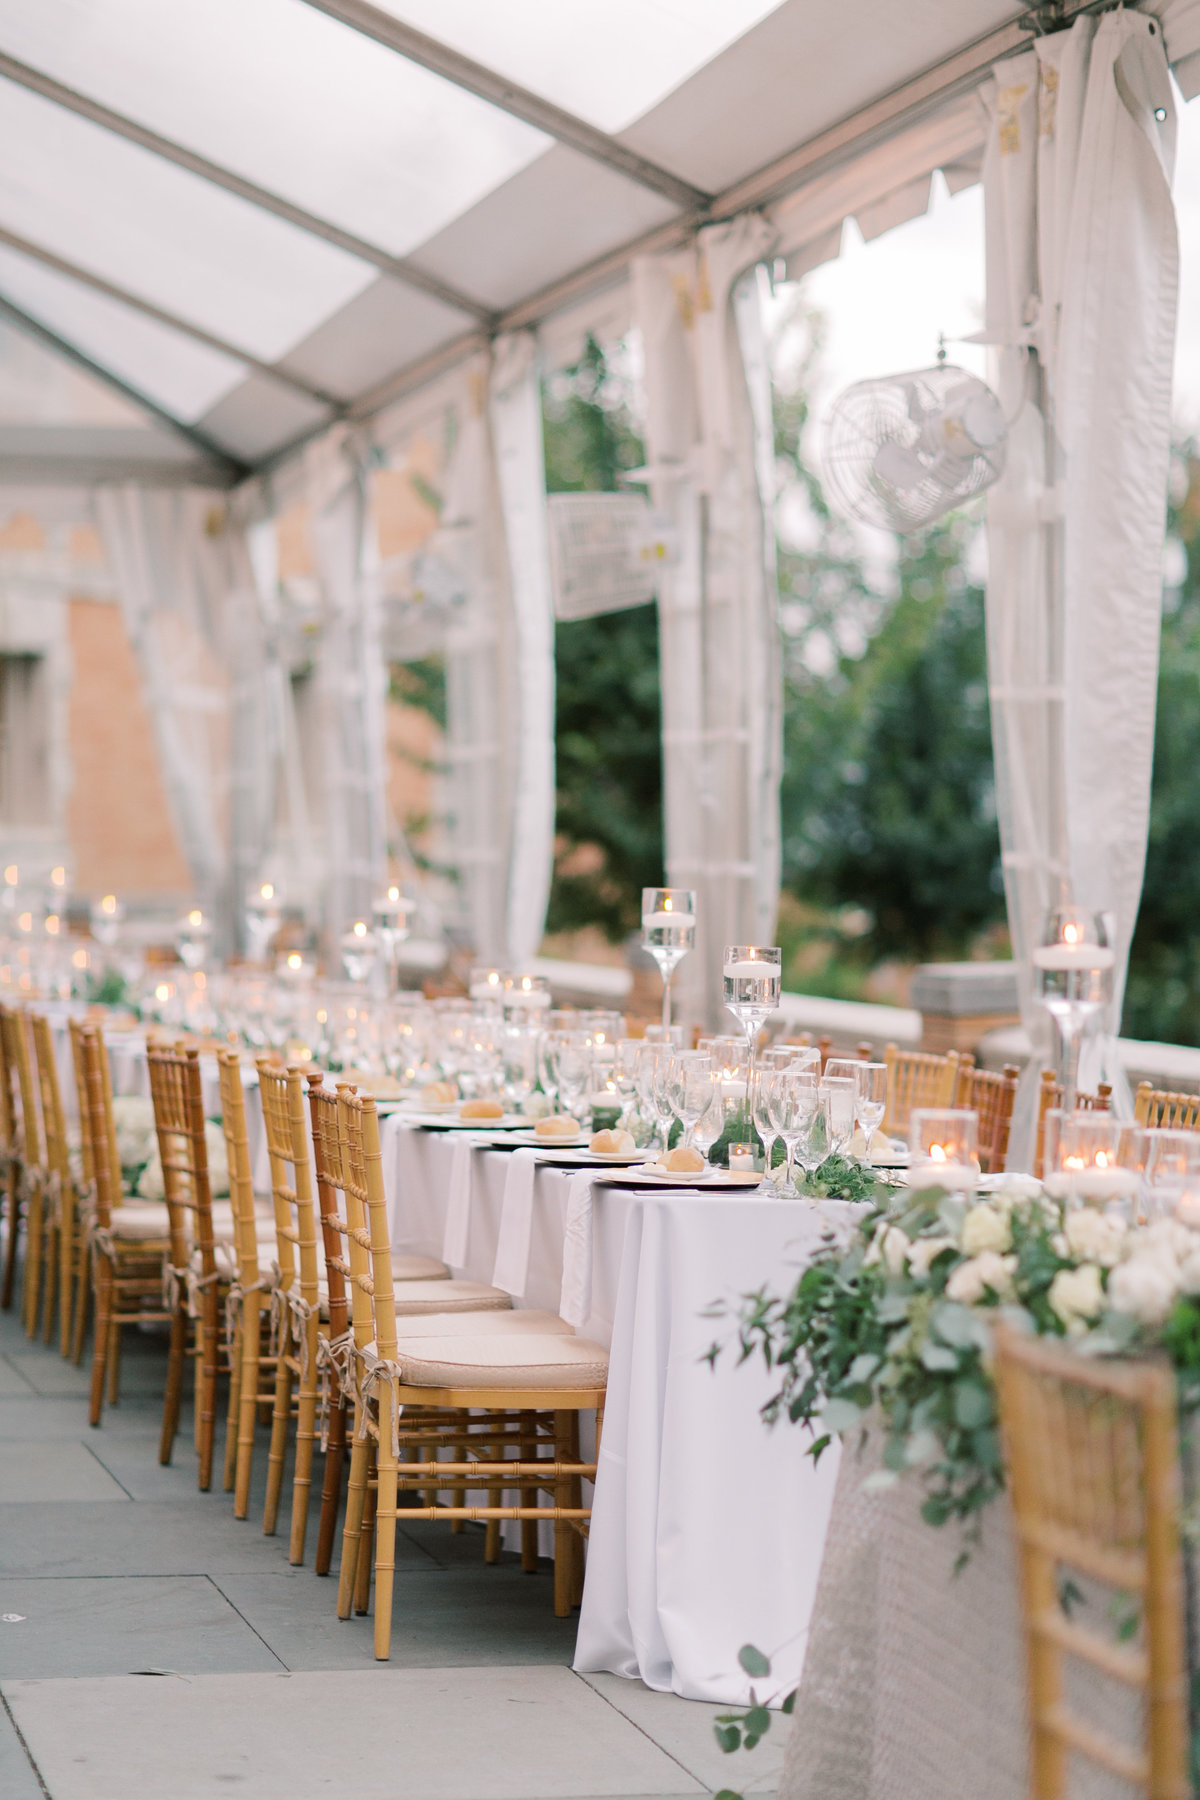 gold chairs and long tables with white table clothes for wedding reception decor